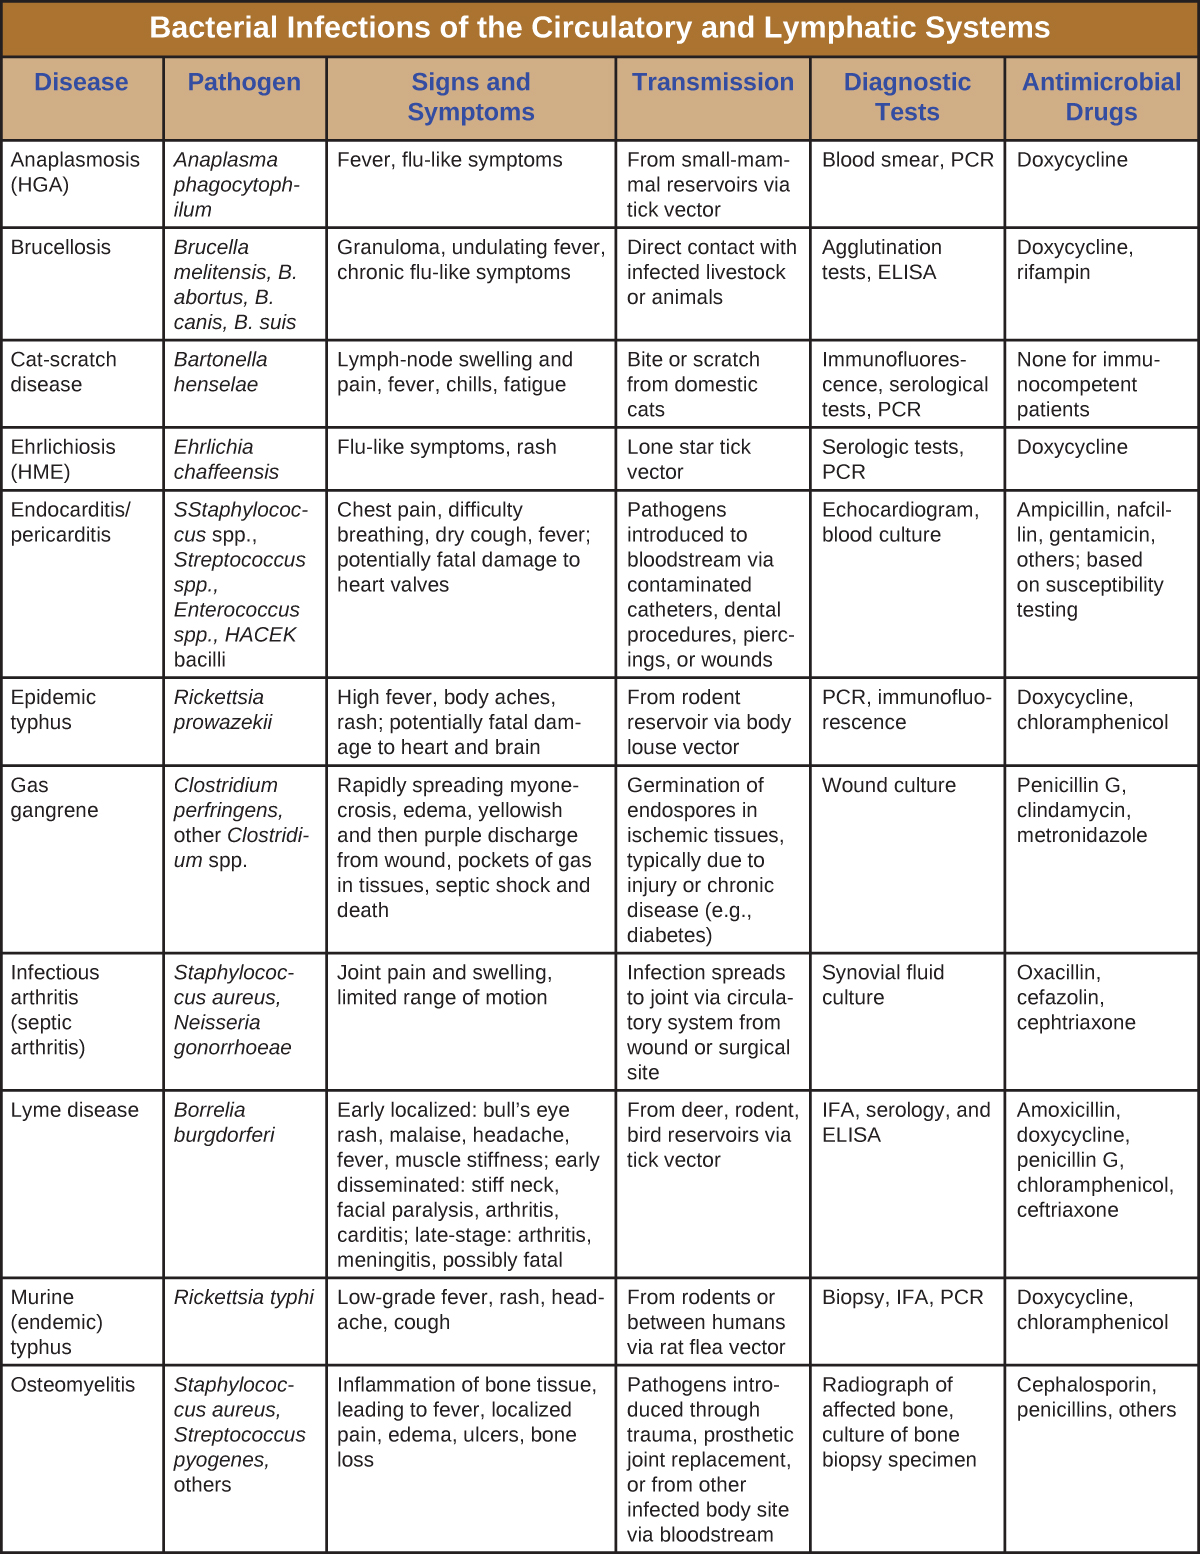 Table titled: Bacterial Infections of the Circulatory and Lymphatic Systems. Columns: Disease, Pathogen, Signs and Symptoms, Transmission, Diagnostic Tests, Antimicrobial Drugs. Anaplasmosis (HGA); Anaplasma phagocytophilum; Fever, flu-like symptoms; From small-mammal reservoirs via tick vector; Blood smear, PCR; Doxycycline. Brucellosis; Brucella melitensis, B. abortus, B. canis, B. suis; Granuloma, undulating fever, chronic flu-like symptoms; Direct contact with infected livestock or animals; Agglutination tests, ELISA; Doxycycline, rifampin. Cat-scratch disease; Bartonella henselae; Lymph-node swelling and pain, fever, chills, fatigue; Bite or scratch from domestic cats; Immunofluorescence, serological tests, PCR; None for immunocompetent patients. Ehrlichiosis (HME); Ehrlichia chaffeensis;Flu-like symptoms, rash; Lone star tick vector; Serologic tests, PCR; Doxycycline. Endocarditis/pericarditis; Staphylococcus spp., Streptococcus spp., Enterococcus spp., HACEK bacilli; Chest pain, difficulty breathing, dry cough, fever; potentially fatal damage to heart valves; Pathogens introduced to bloodstream via contaminated catheters, dental procedures, piercings, or wounds; Echocardiogram, blood culture; Ampicillin, nafcillin, gentamicin, others; based on susceptibility testing. Epidemic typhus; Rickettsia prowazekii; High fever, body aches, rash; potentially fatal damage to heart and brain; From rodent reservoir via body louse vector; PCR, immunofluorescence; Doxycycline, chloramphenicol. Gas gangrene; Clostridium perfringens, other Clostridium spp.; Rapidly spreading myonecrosis, edema, yellowish and then purple discharge from wound, pockets of gas in tissues, septic shock and death; Germination of endospores in ischemic tissues, typically due to injury or chronic disease (e.g., diabetes); Wound culture; Penicillin G, clindamycin, metronidazole. Infectious arthritis (septic arthritis); Staphylococcus aureus, Neisseria gonorrhoeae; Joint pain and swelling, limited range of motion; Infection spreads to joint via circulatory system from wound or surgical site; Synovial fluid culture; Oxacillin, cefazolin, cephtriaxone. Lyme disease; Borrelia burgdorferi; Early localized: bull’s eye rash, malaise, headache, fever, muscle stiffness; early disseminated: stiff neck, facial paralysis, arthritis, carditis; late-stage: arthritis, meningitis, possibly fatal; From deer, rodent, bird reservoirs via tick vector; IFA, serology, and ELISA; Amoxicillin, doxycycline, penicillin G, chloramphenicol, ceftriaxone. Murine (endemic) typhus; Rickettsia typhi; Low-grade fever, rash, headache, cough; From rodents or between humans via rat flea vector; Biopsy, IFA, PCR; Doxycycline, chloramphenicol. Osteomyelitis; Staphylococcus aureus, Streptococcus pyogenes, others; Inflammation of bone tissue, leading to fever, localized pain, edema, ulcers, bone loss; Pathogens introduced through trauma, prosthetic joint replacement, or from other infected body site via bloodstream; Radiograph of affected bone, culture of bone biopsy specimen; Cephalosporin, penicillins, others.